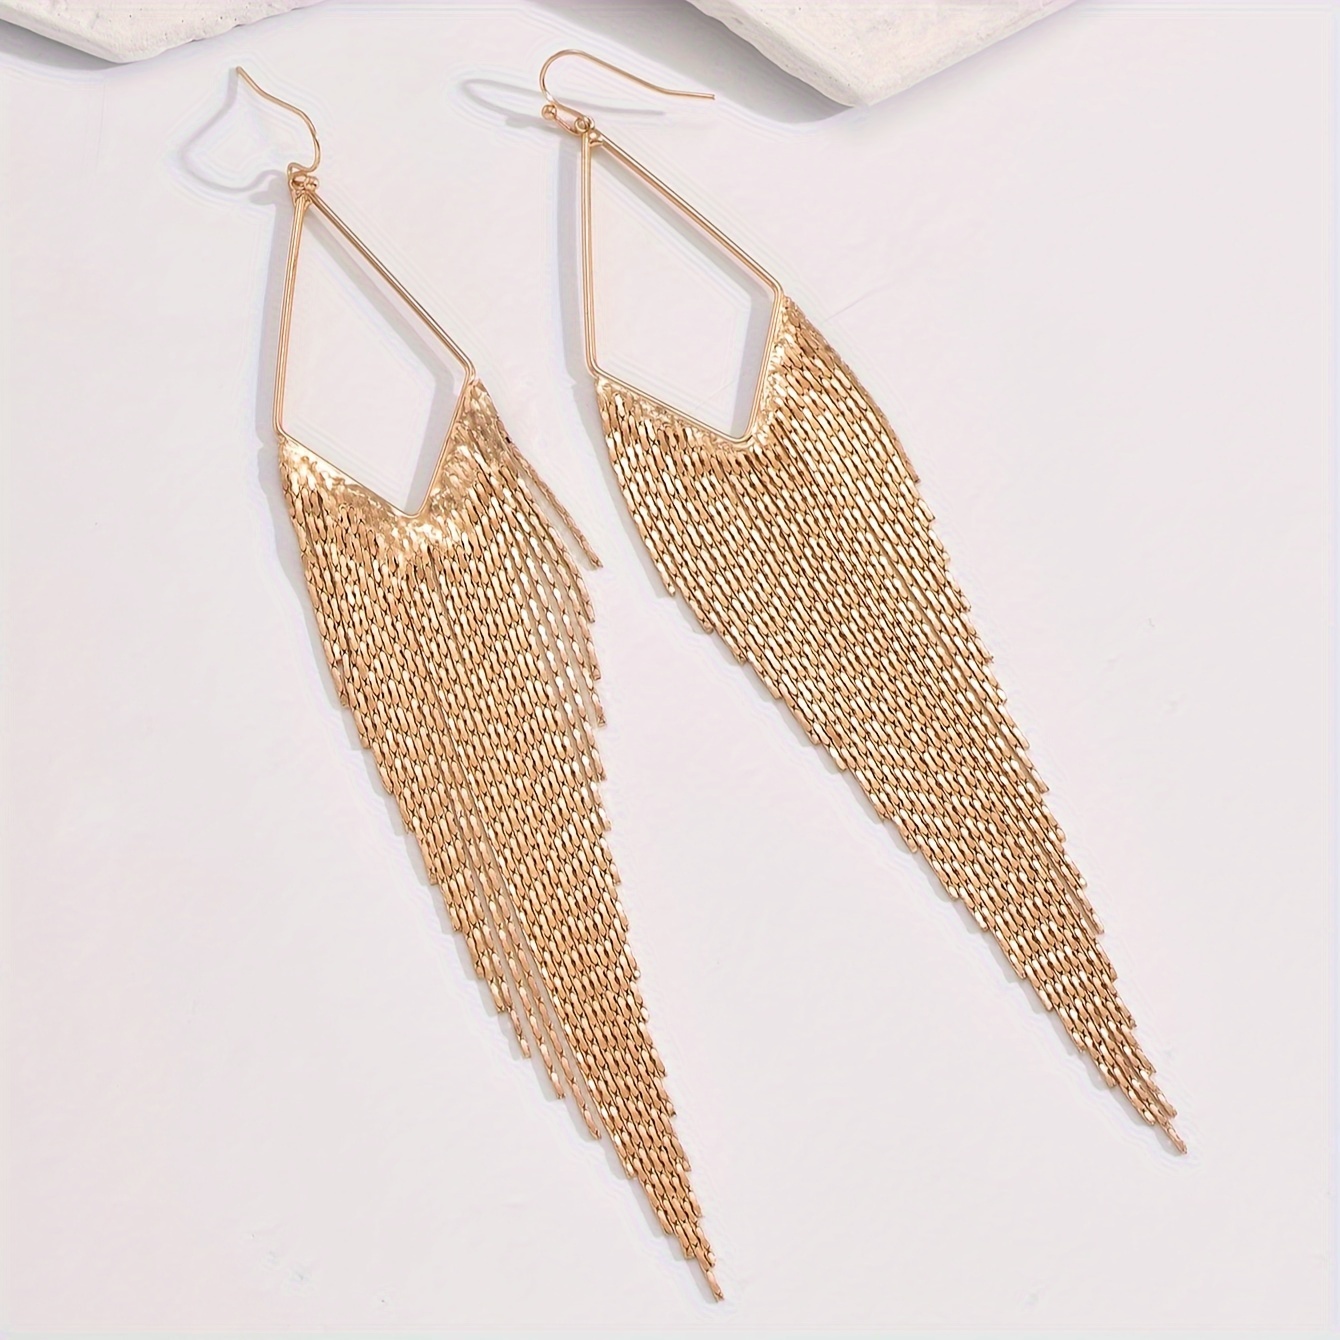 

1 Pair Of Dangle Earrings 14k Gold Plated Trendy Long Tassel Design Match Daily Outfits Evening Party Decor Dupes Luxury Jewelry